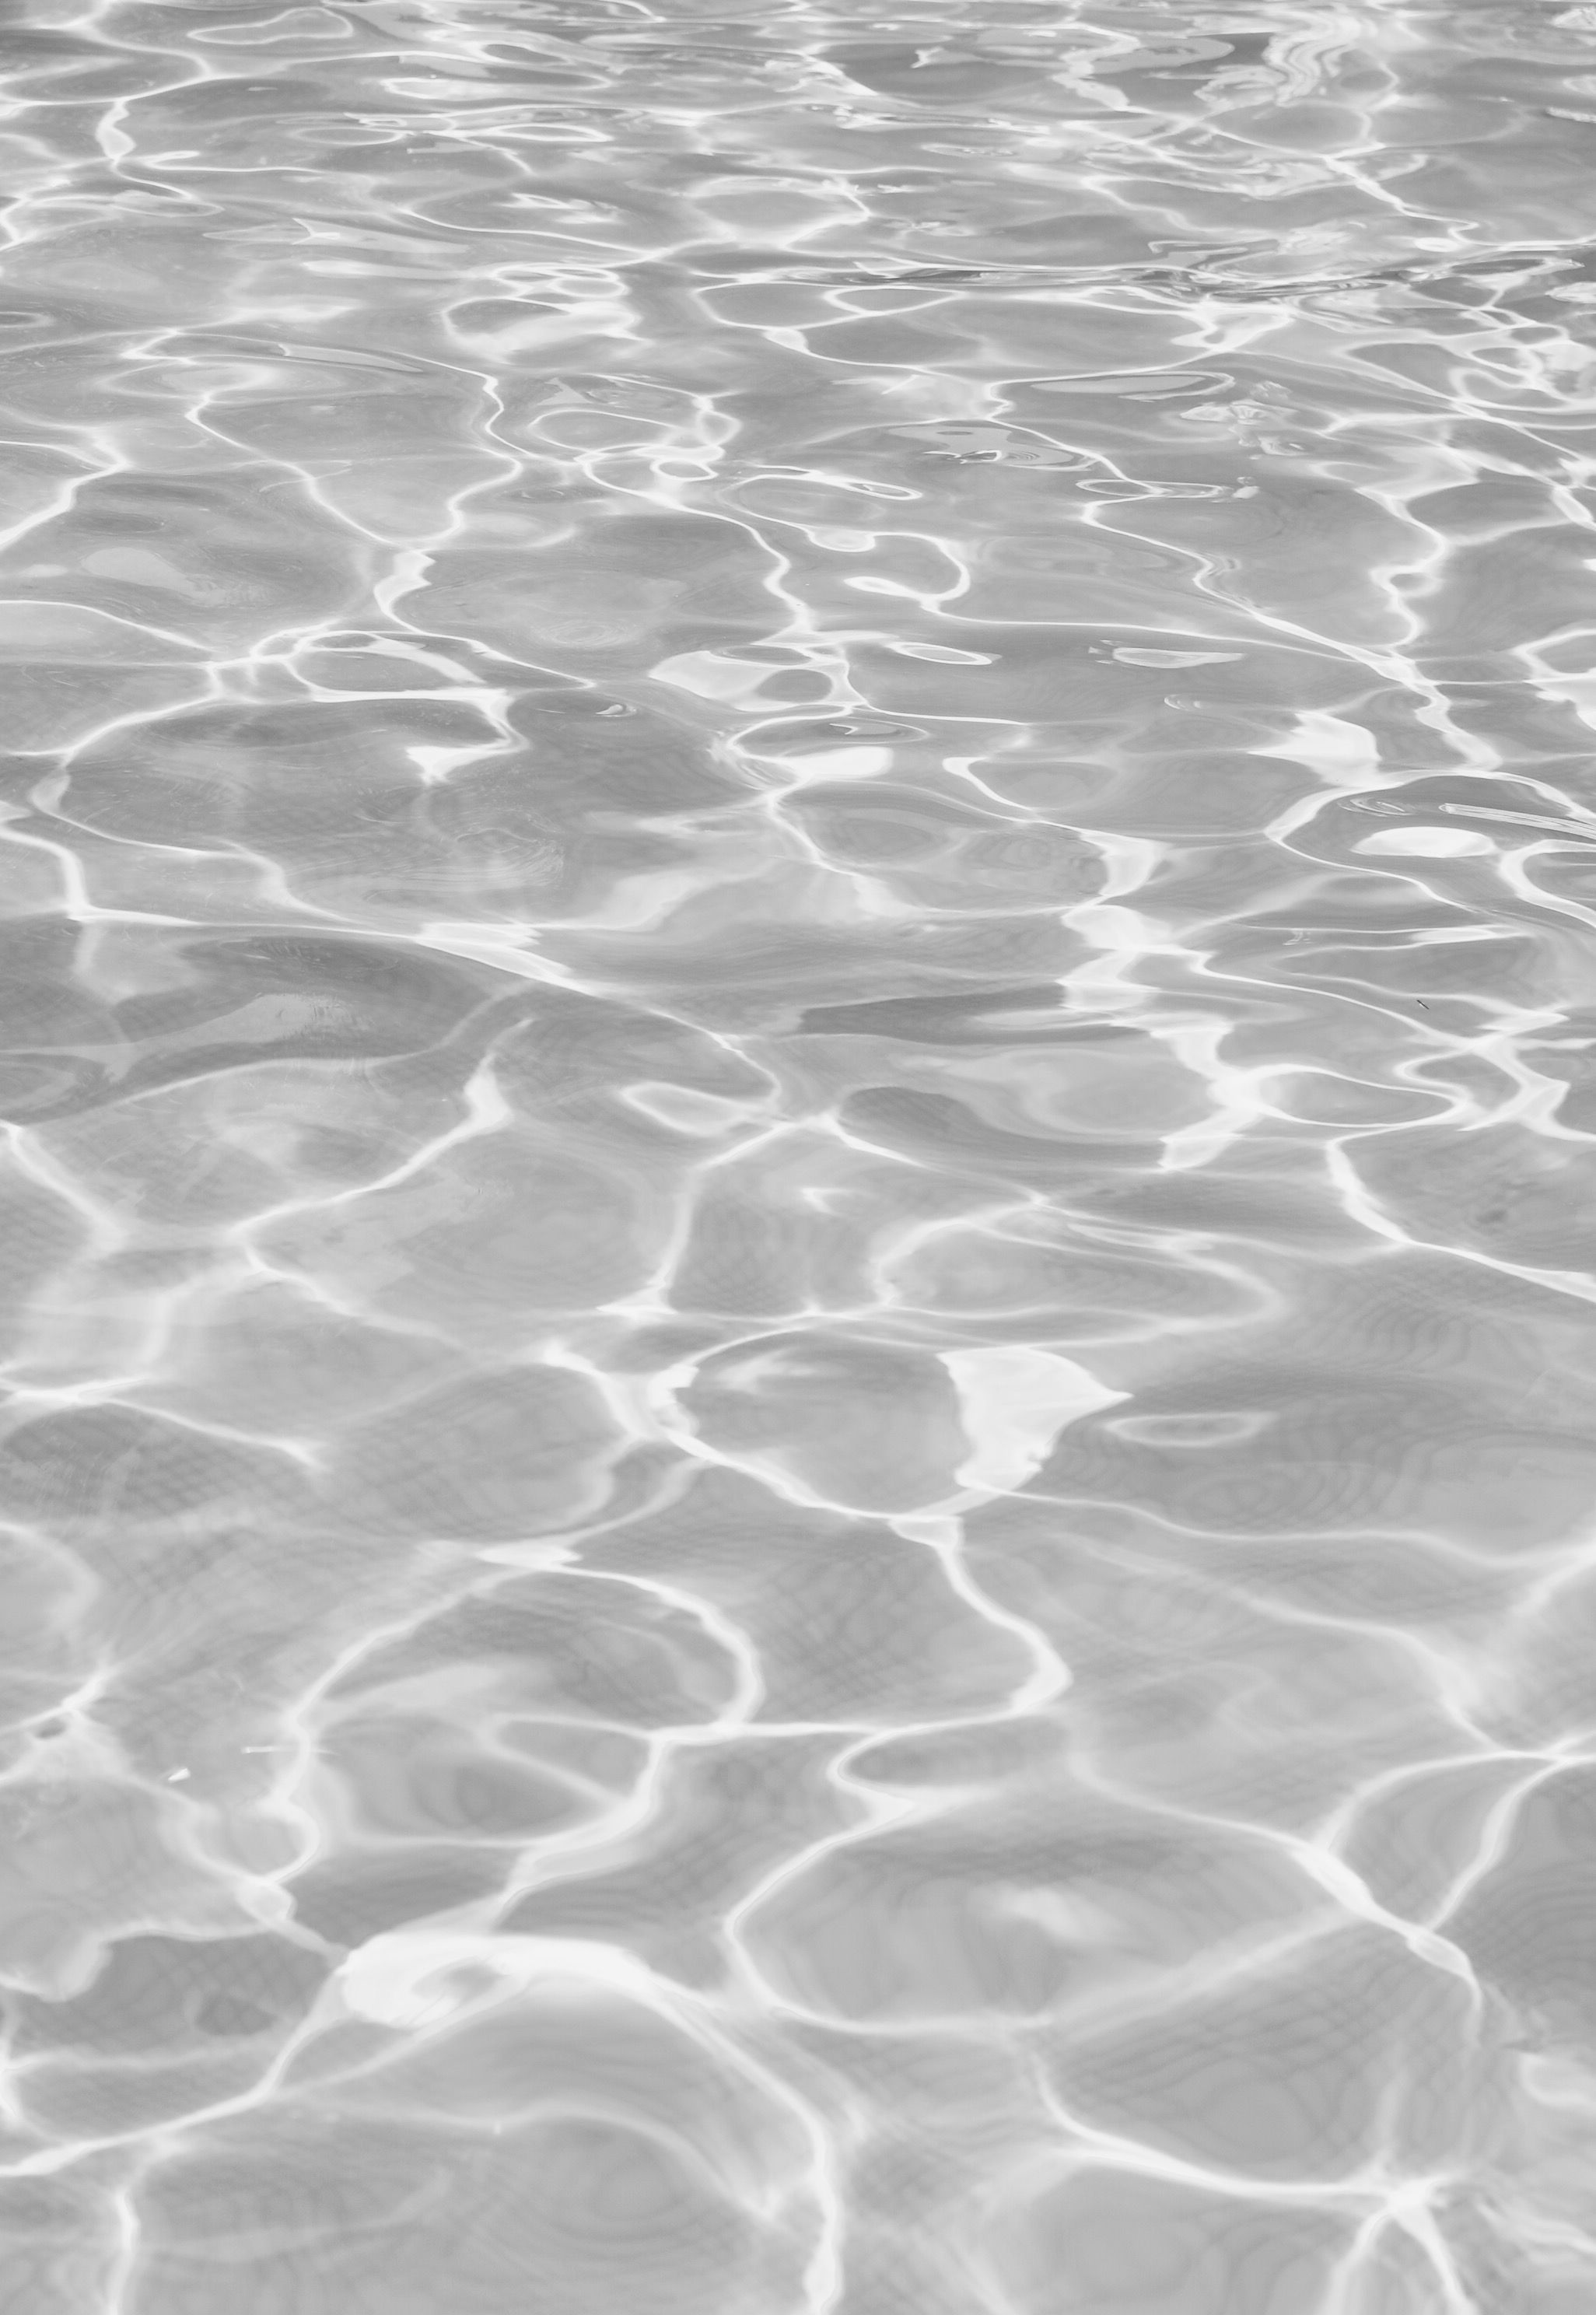 A black and white photo of rippling water. - Gray, water, white